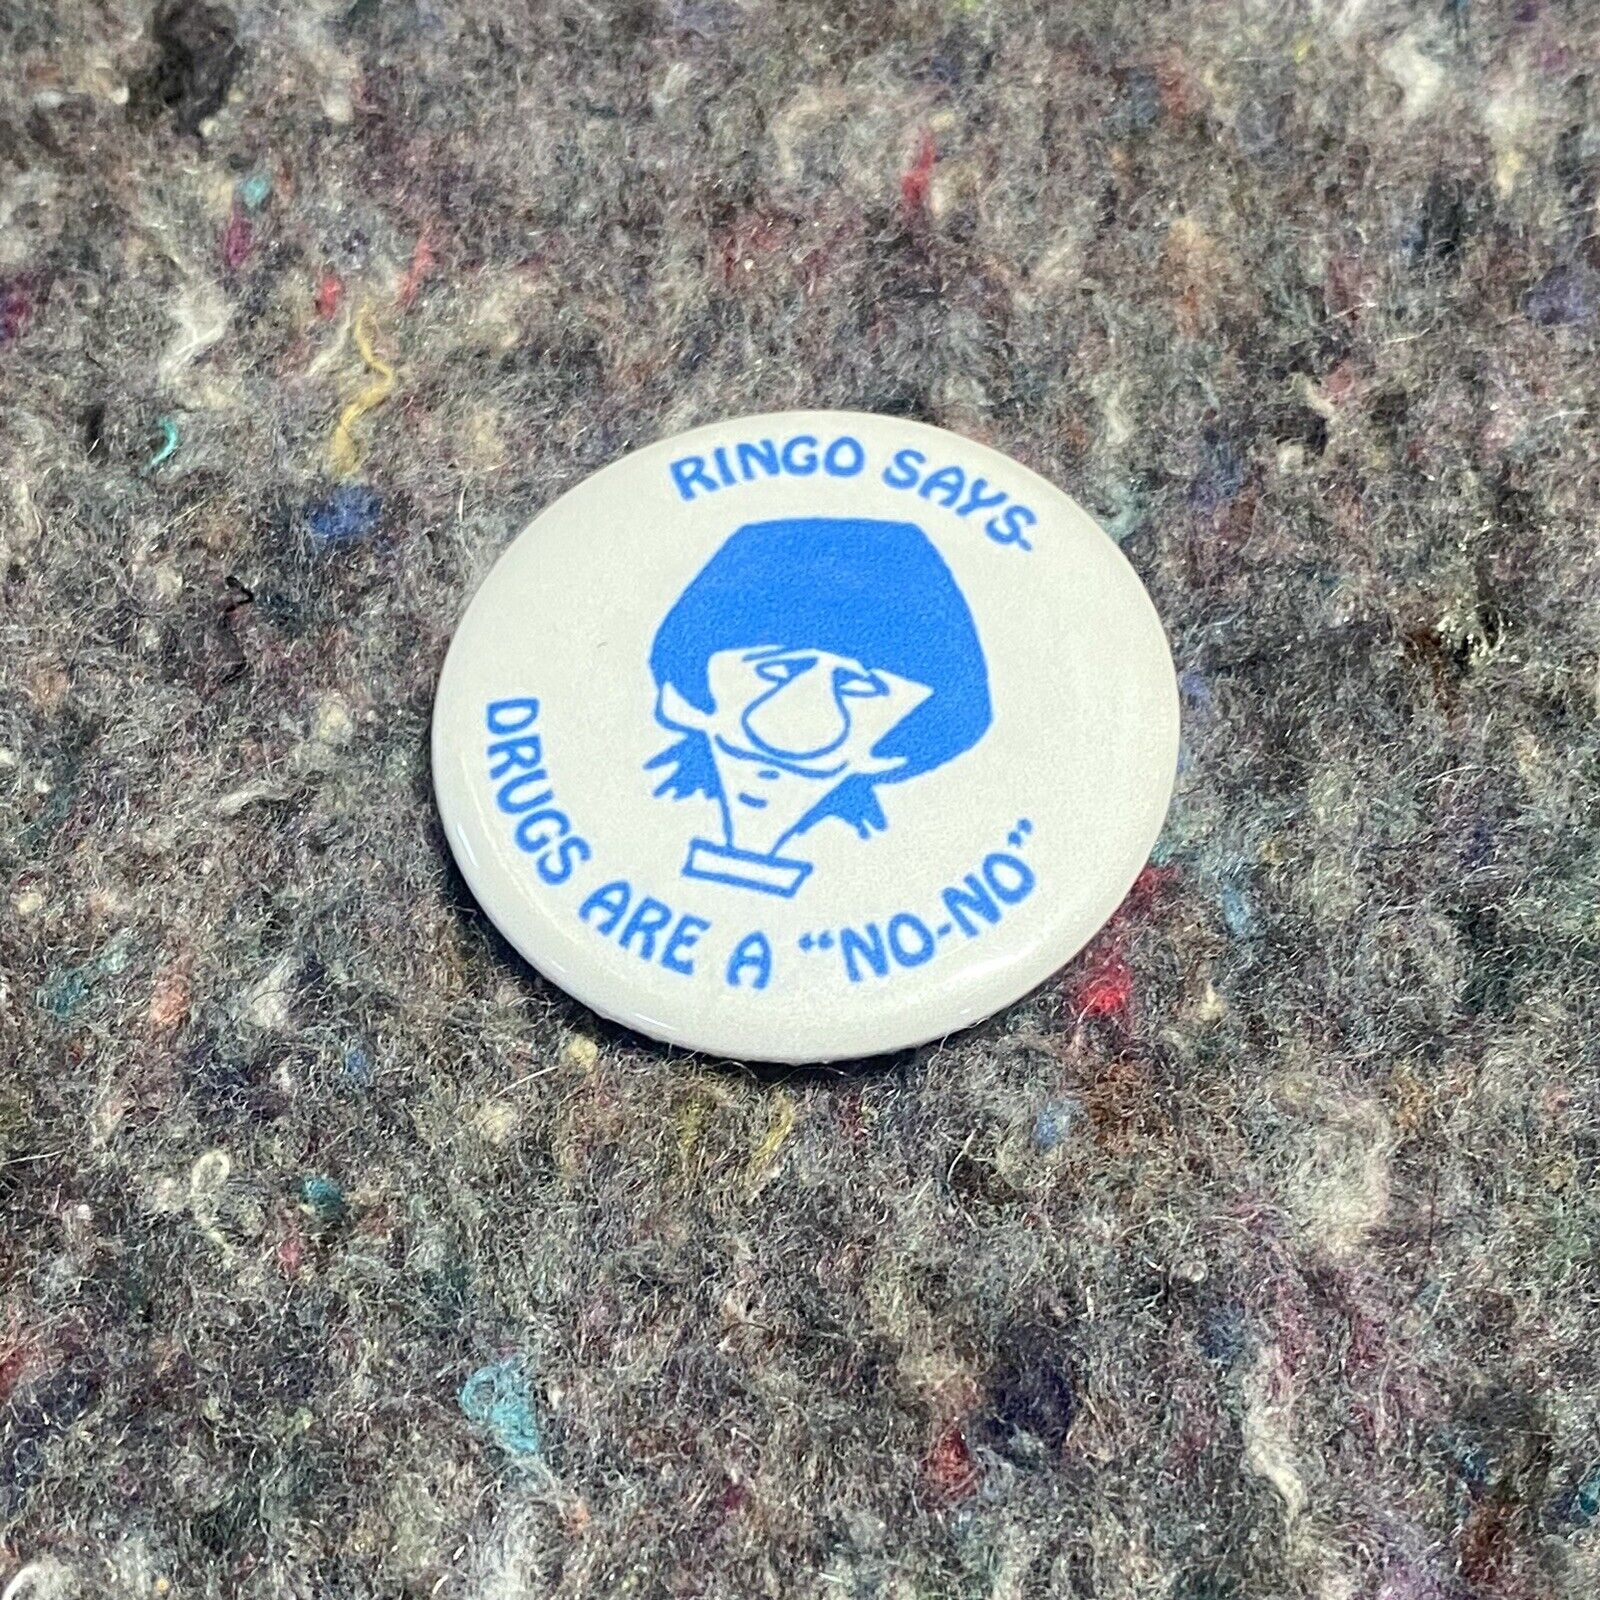 Ringo Starr 1970s? VTG Beatles Music Pin-Back Button “Drugs are a No No”